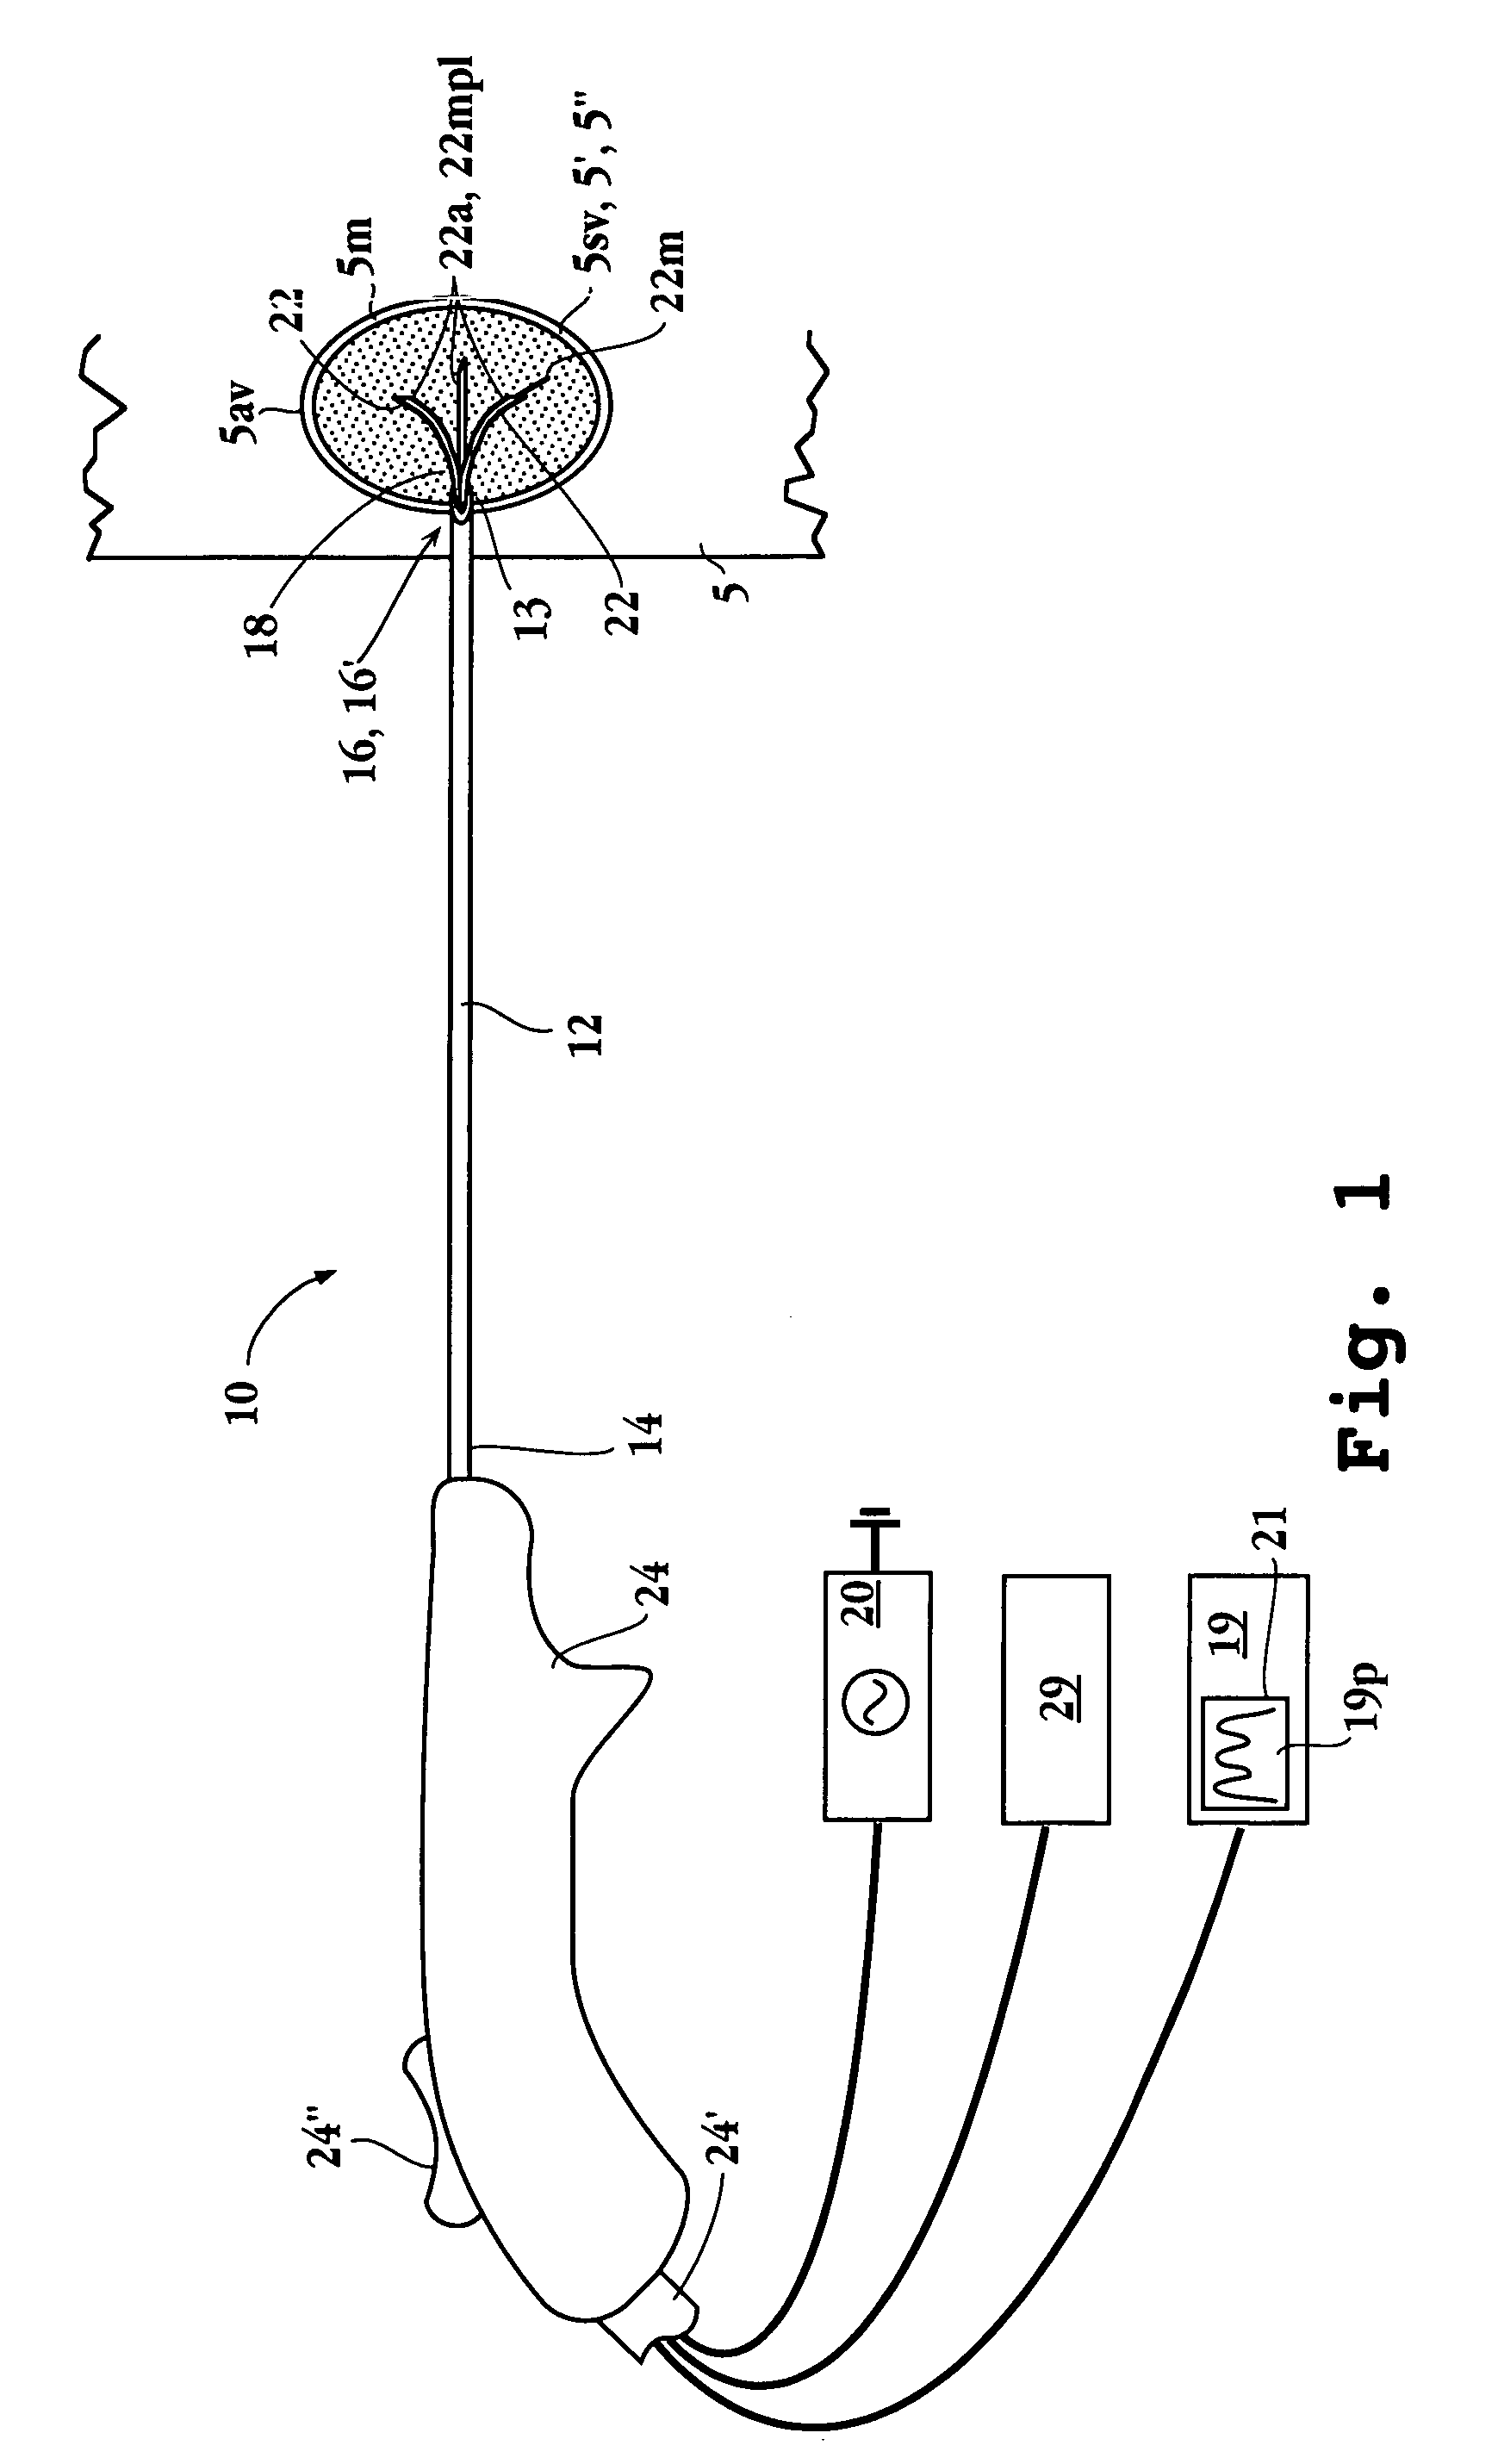 Impedance controlled tissue ablation apparatus and method